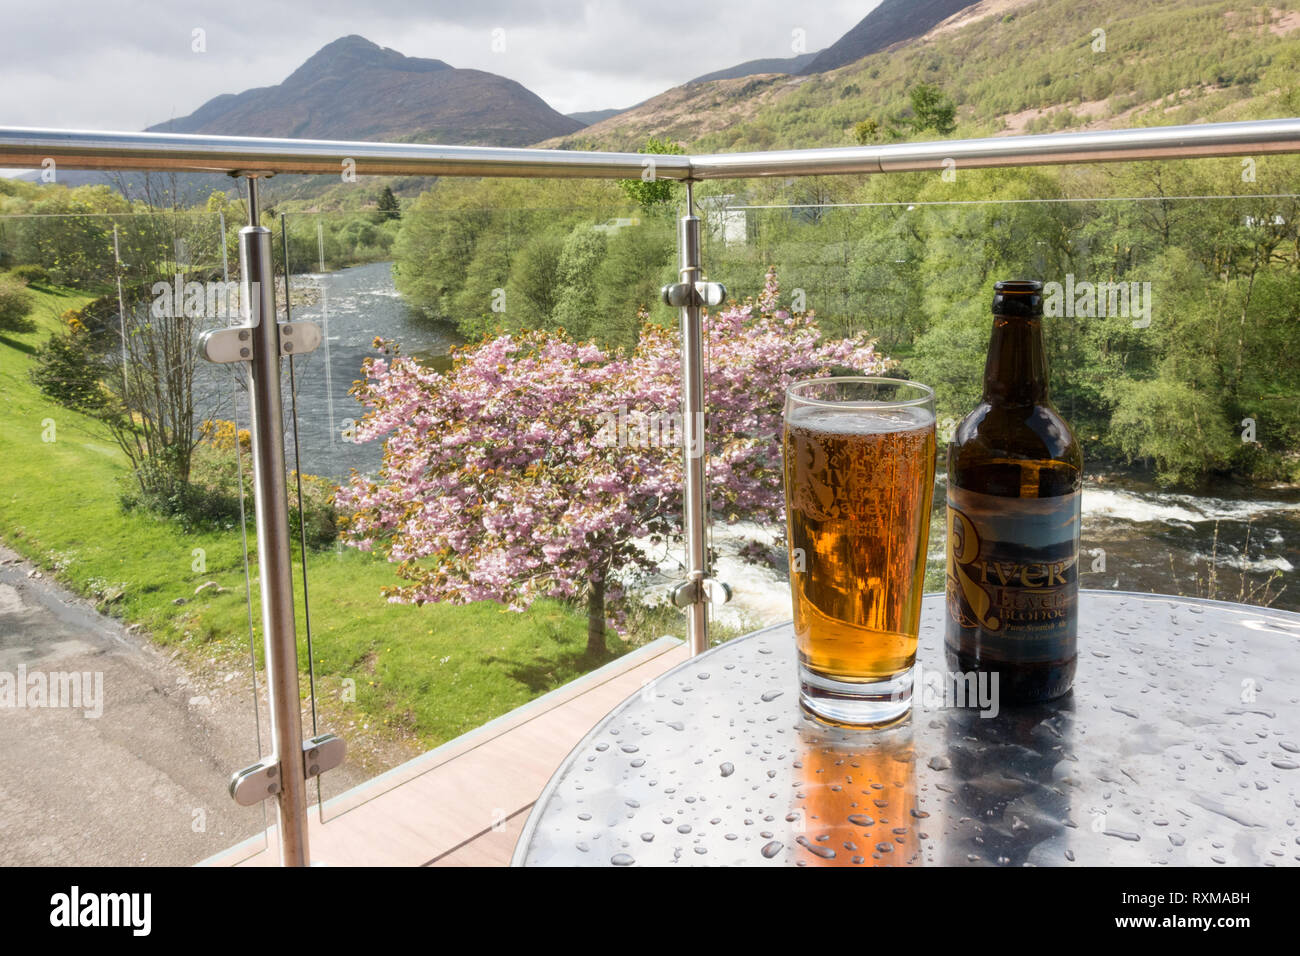 Glass of River Leven Blonde Ale, brewed in Kinlochleven on the balcony of the Highland Getaway Inn overlooking the River Leven, Kinlochleven, Scotland Stock Photo